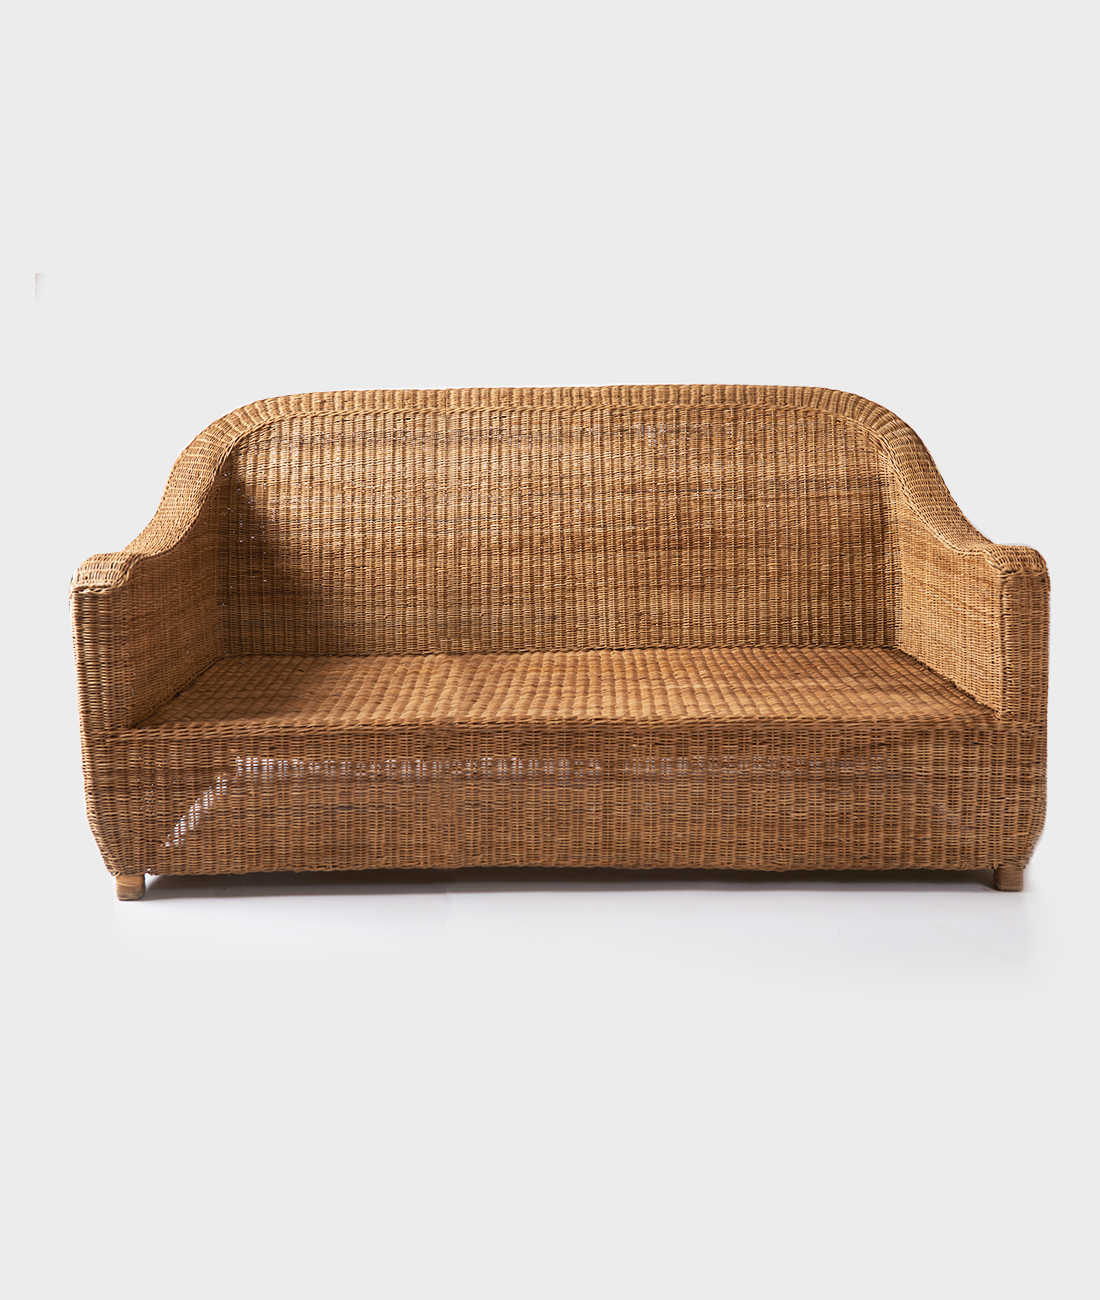 Relaxed Cane 3 Seater